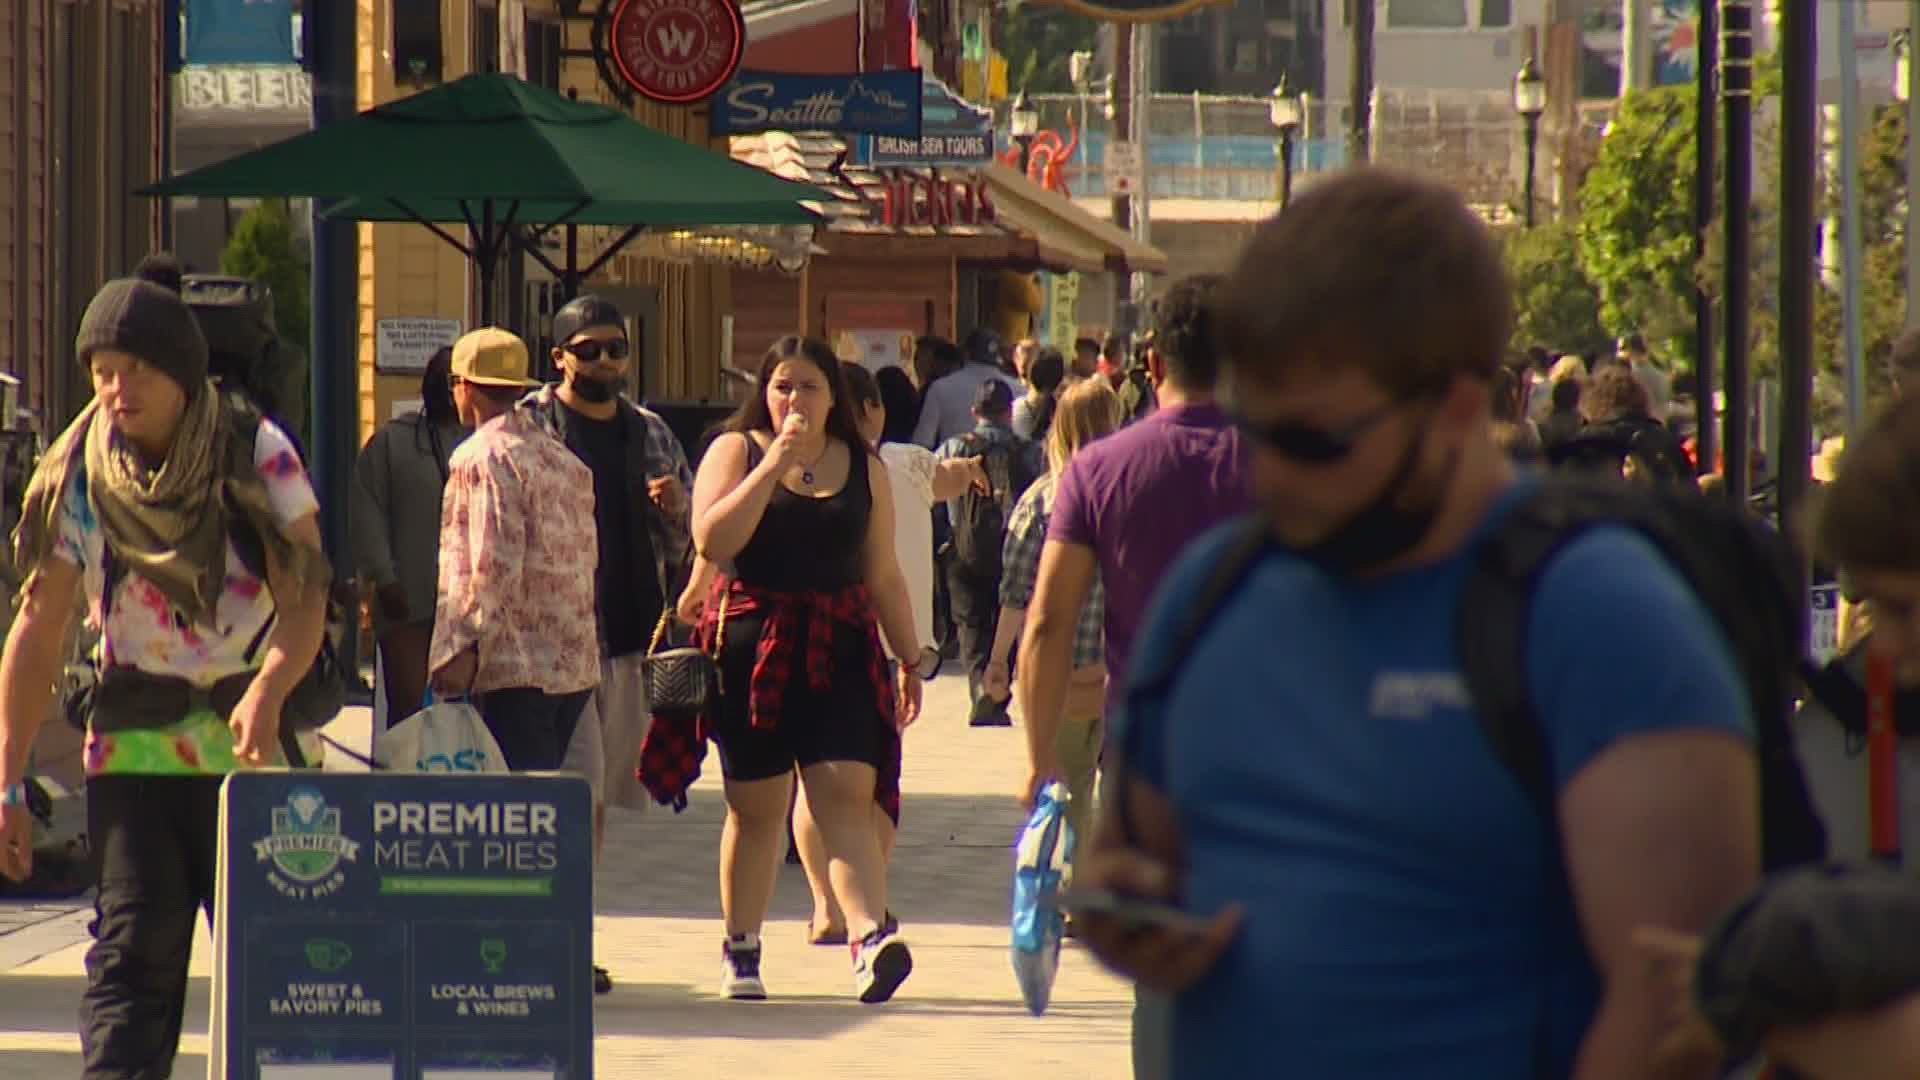 Major events like Ballard Seafood Fest, Capitol Hill Block Party and Friday's sold-out Mariners game make Seattle one of the busiest cities this week.